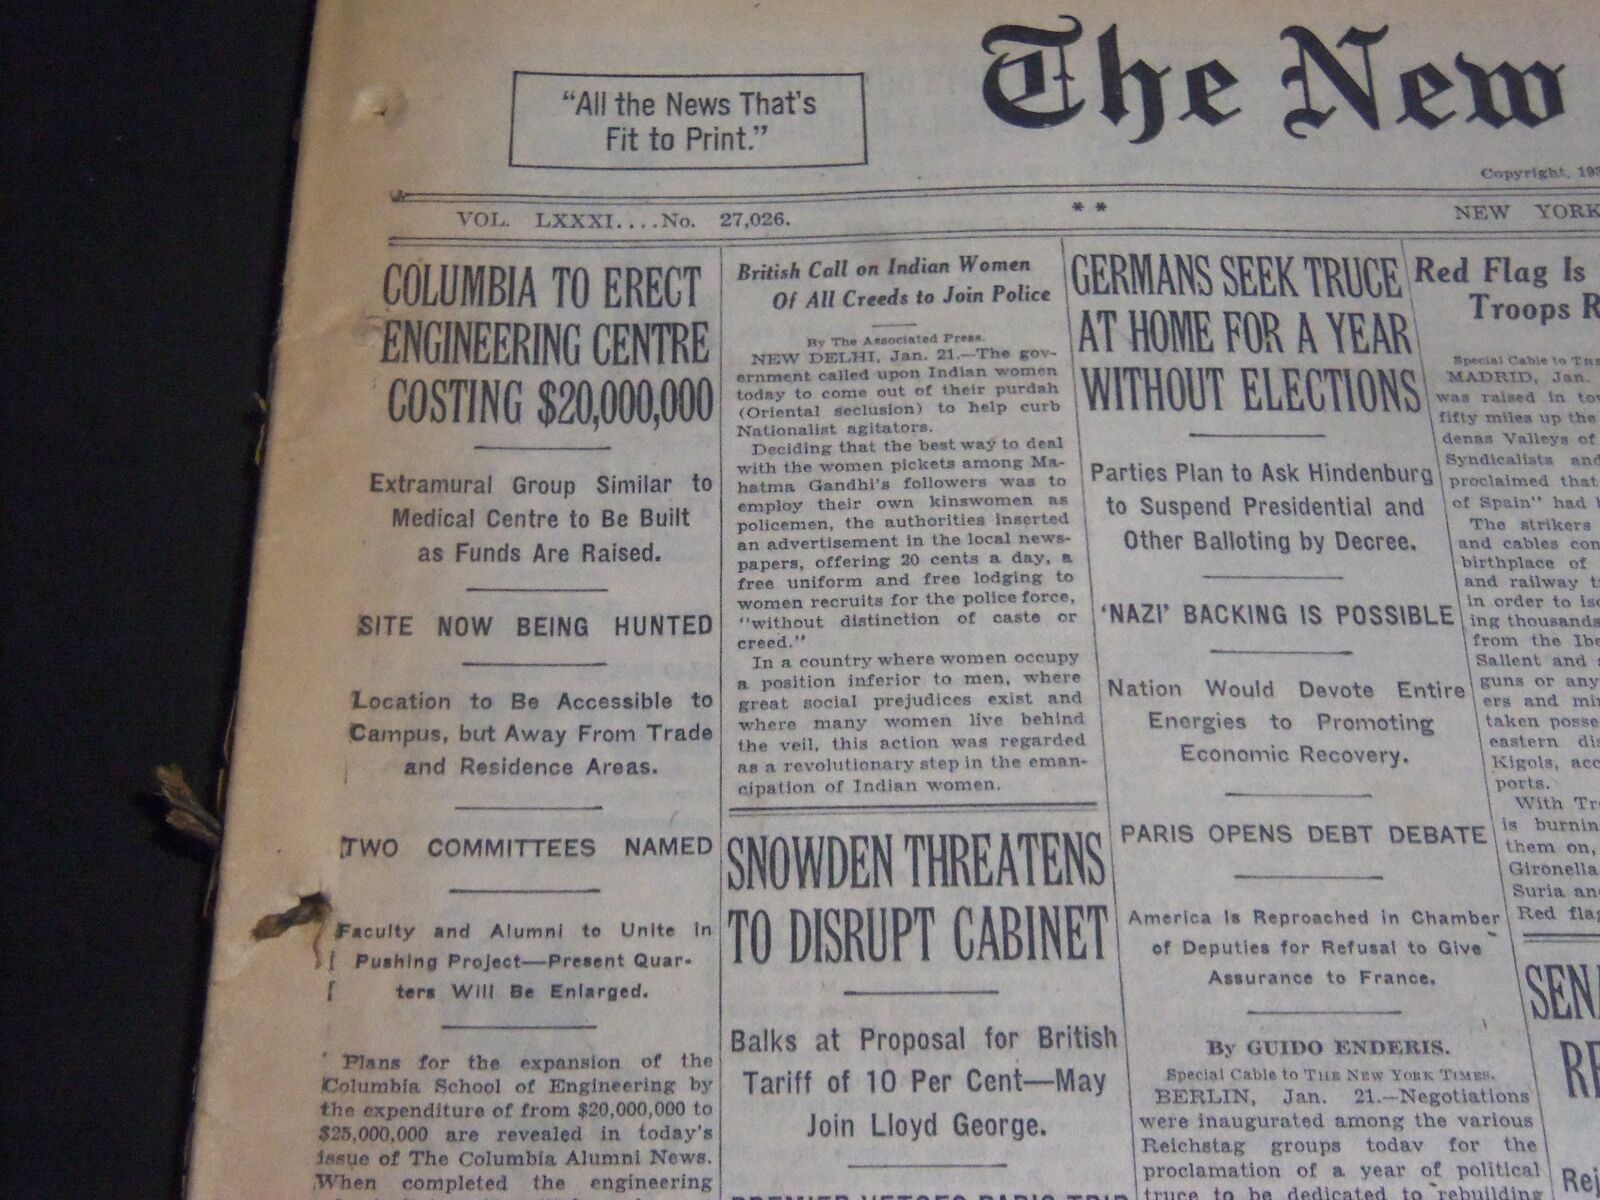 1932 JANUARY 22 NEW YORK TIMES - COLUMBIA TO ERECT ENGINEERING CENTRE - NT 6688